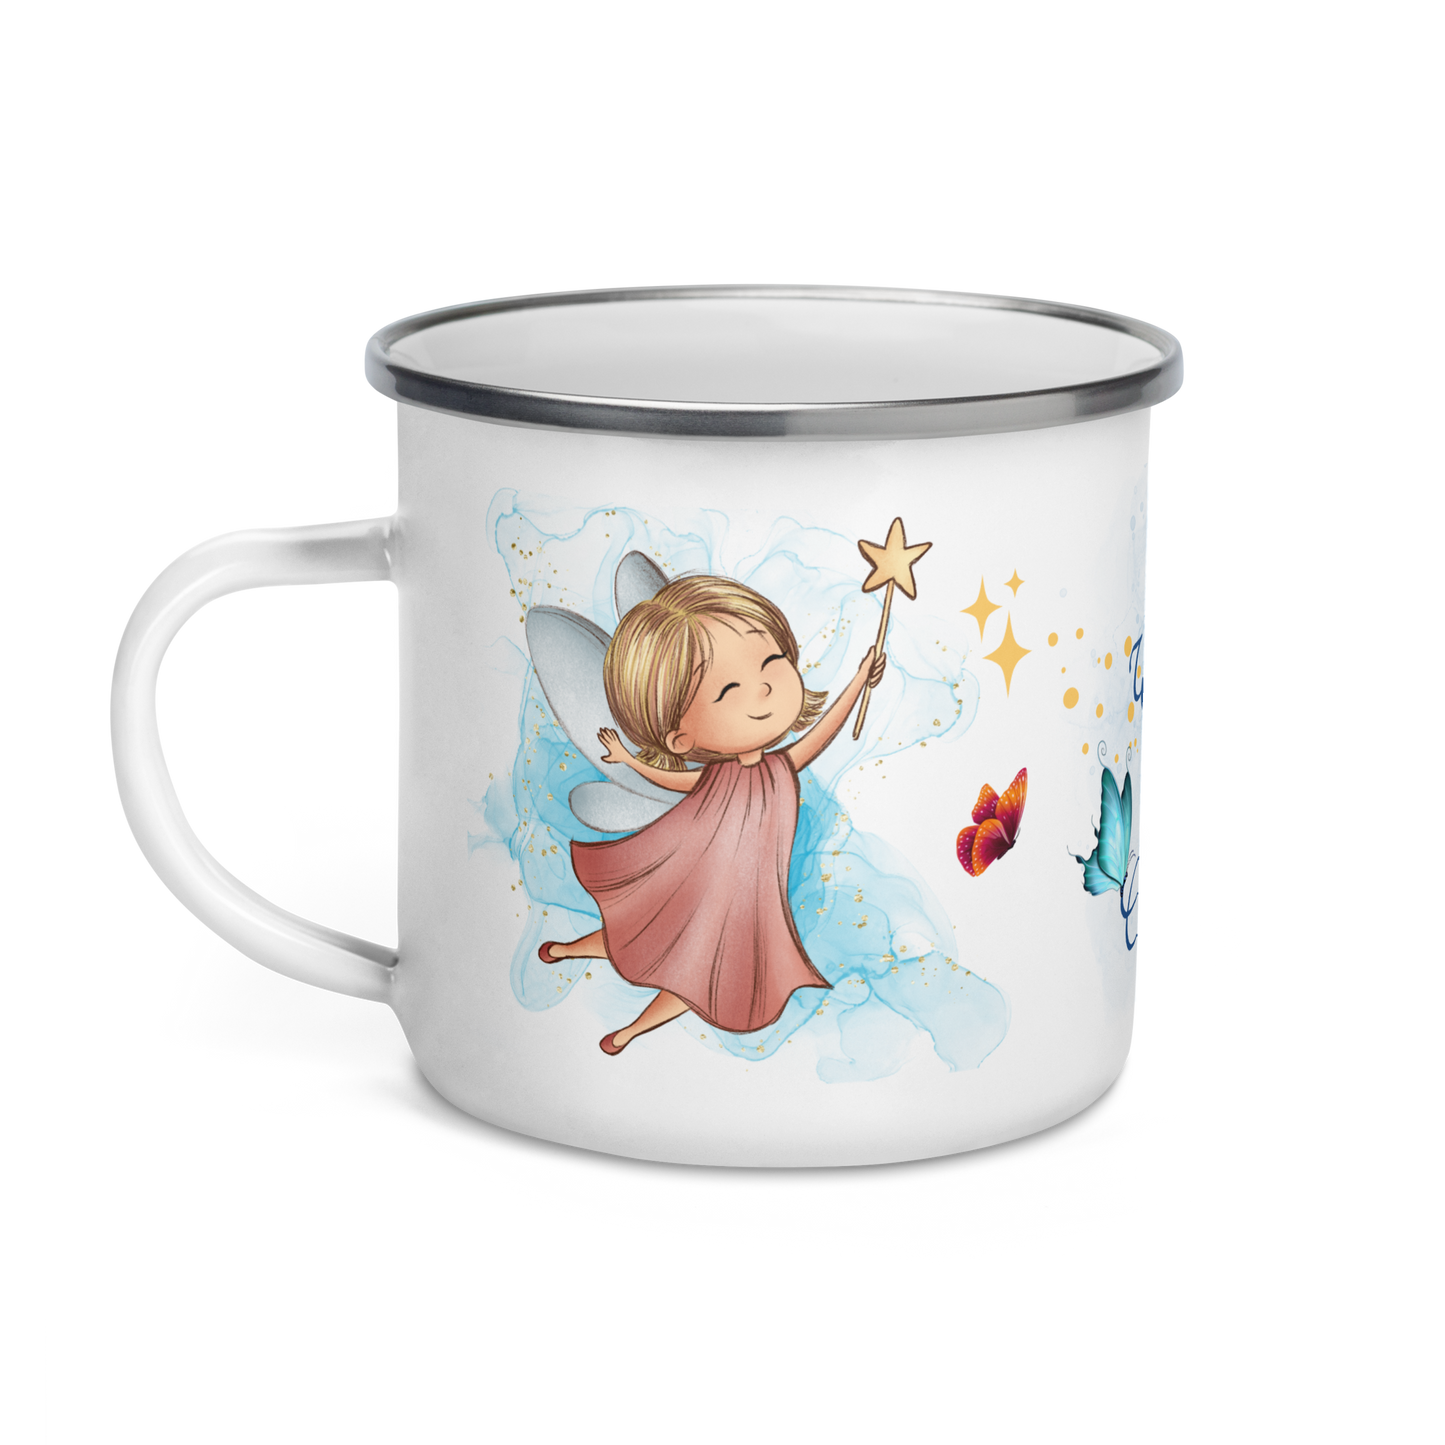 Enamel Mug | All Wishes Are Granted | Little Pink Fairy